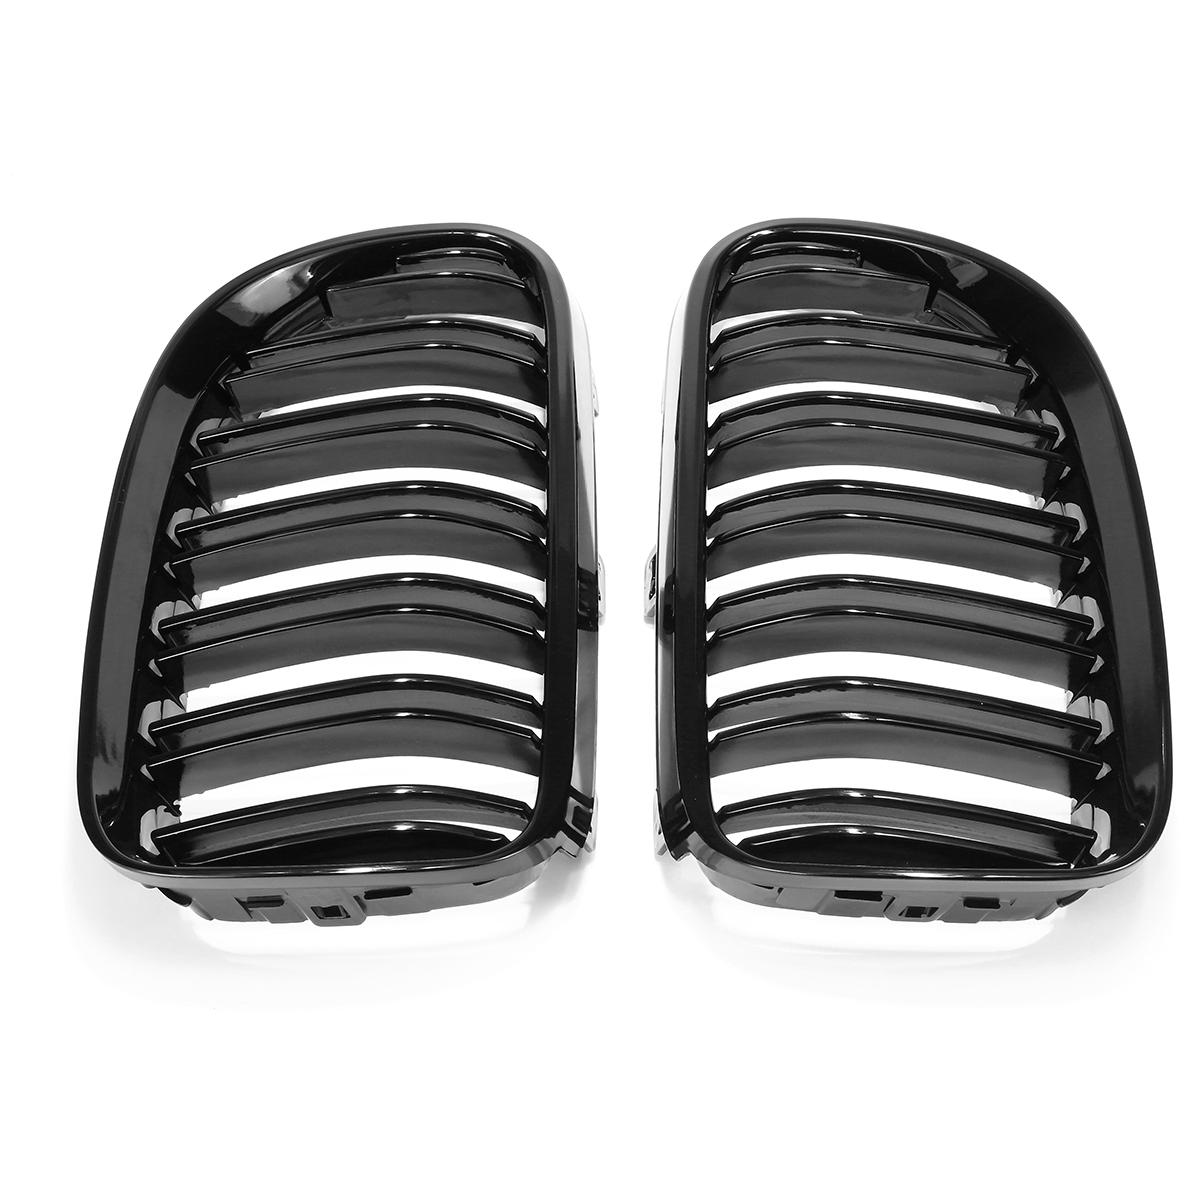 Pair New Gloss Black Front Kidney Grill Grille For BMW 3-Series E92 E93 Facelift 2010-2014